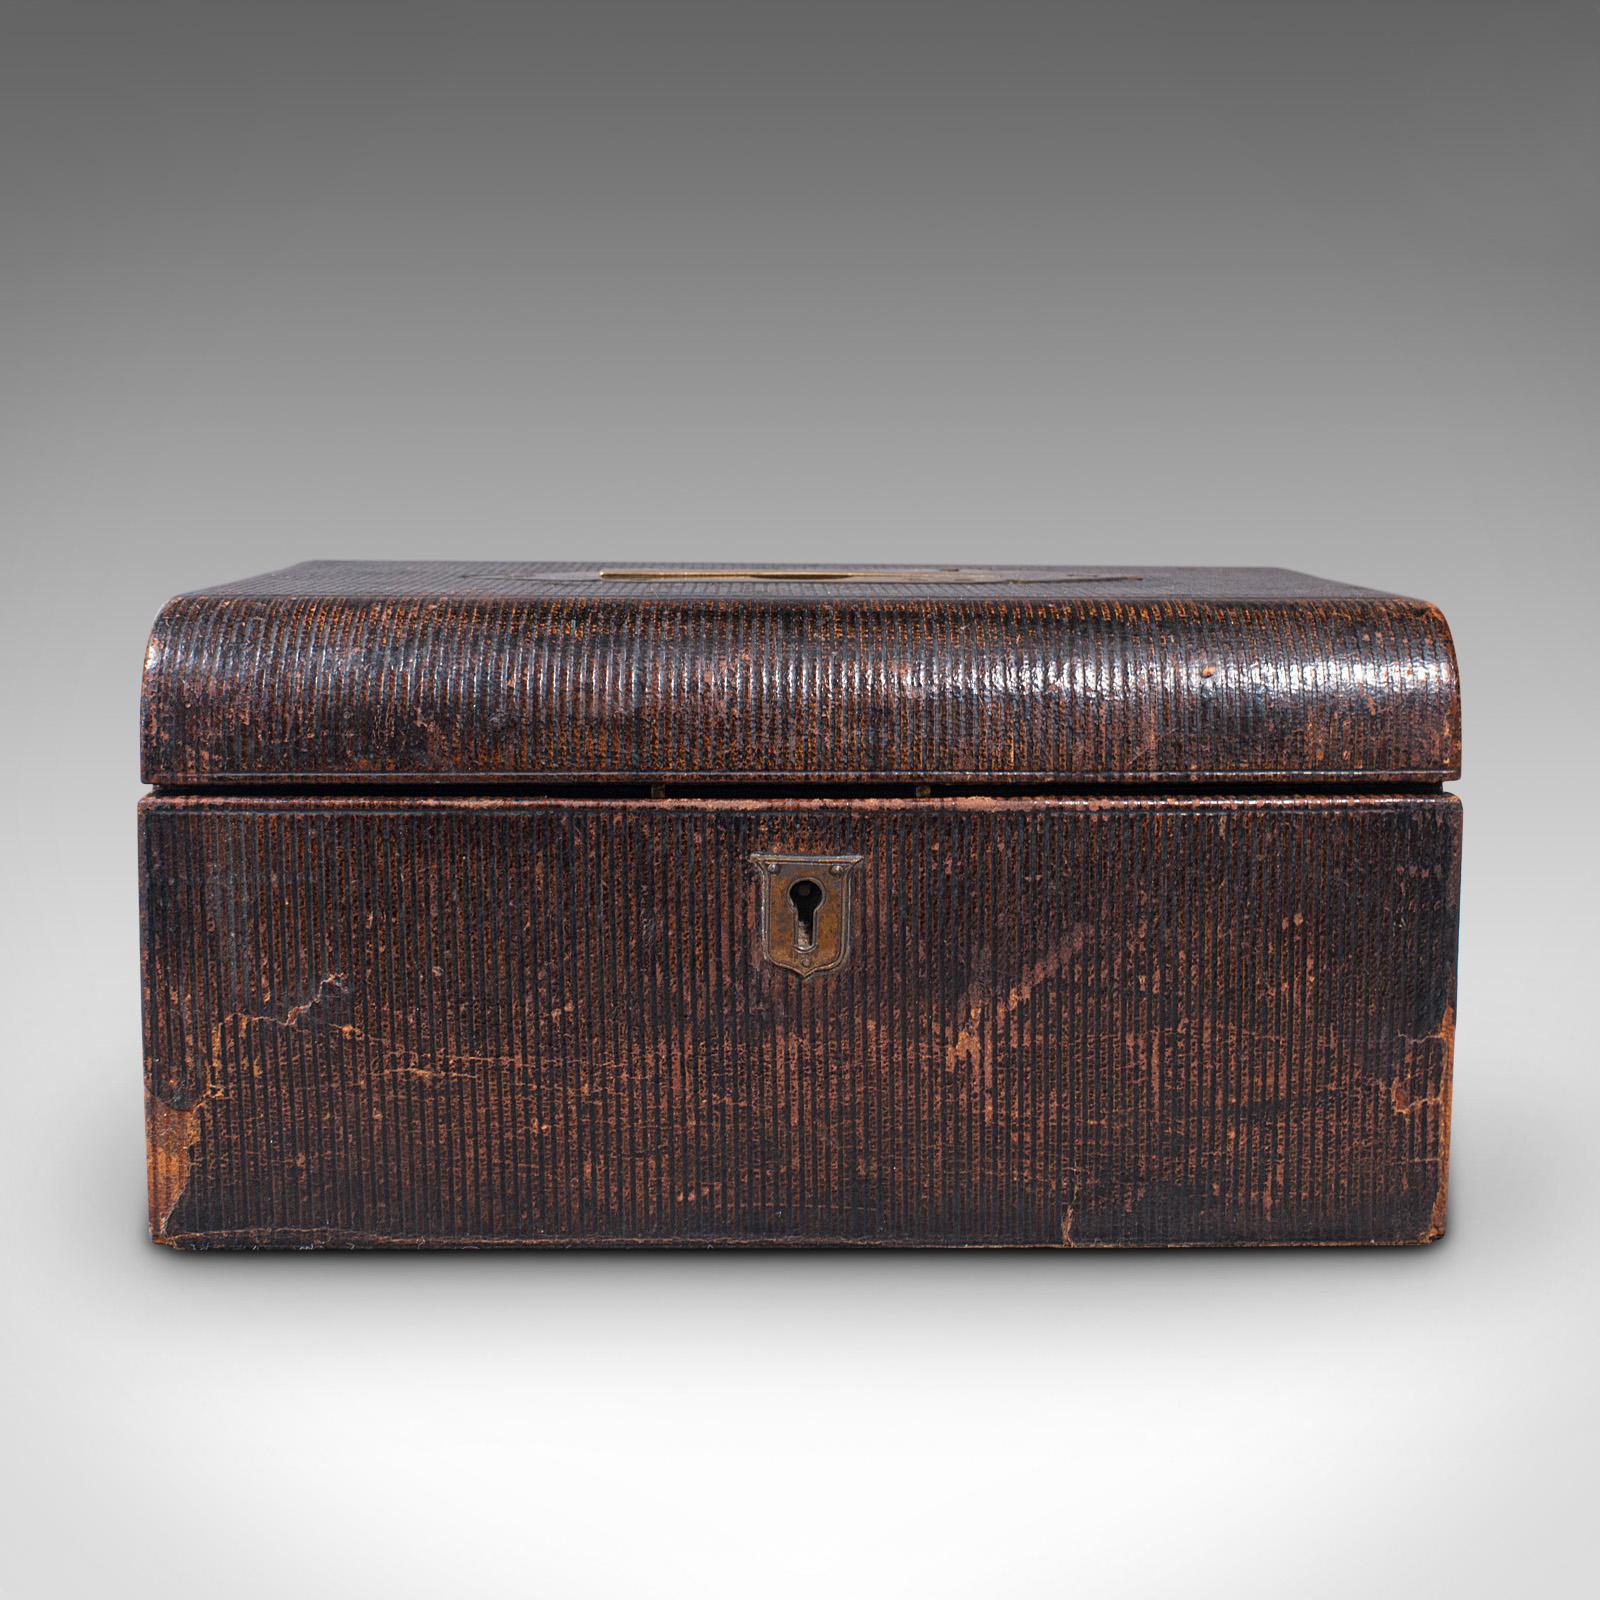 British Antique Travelling Vanity Box, English, Campaign Correspondence Case, Victorian For Sale